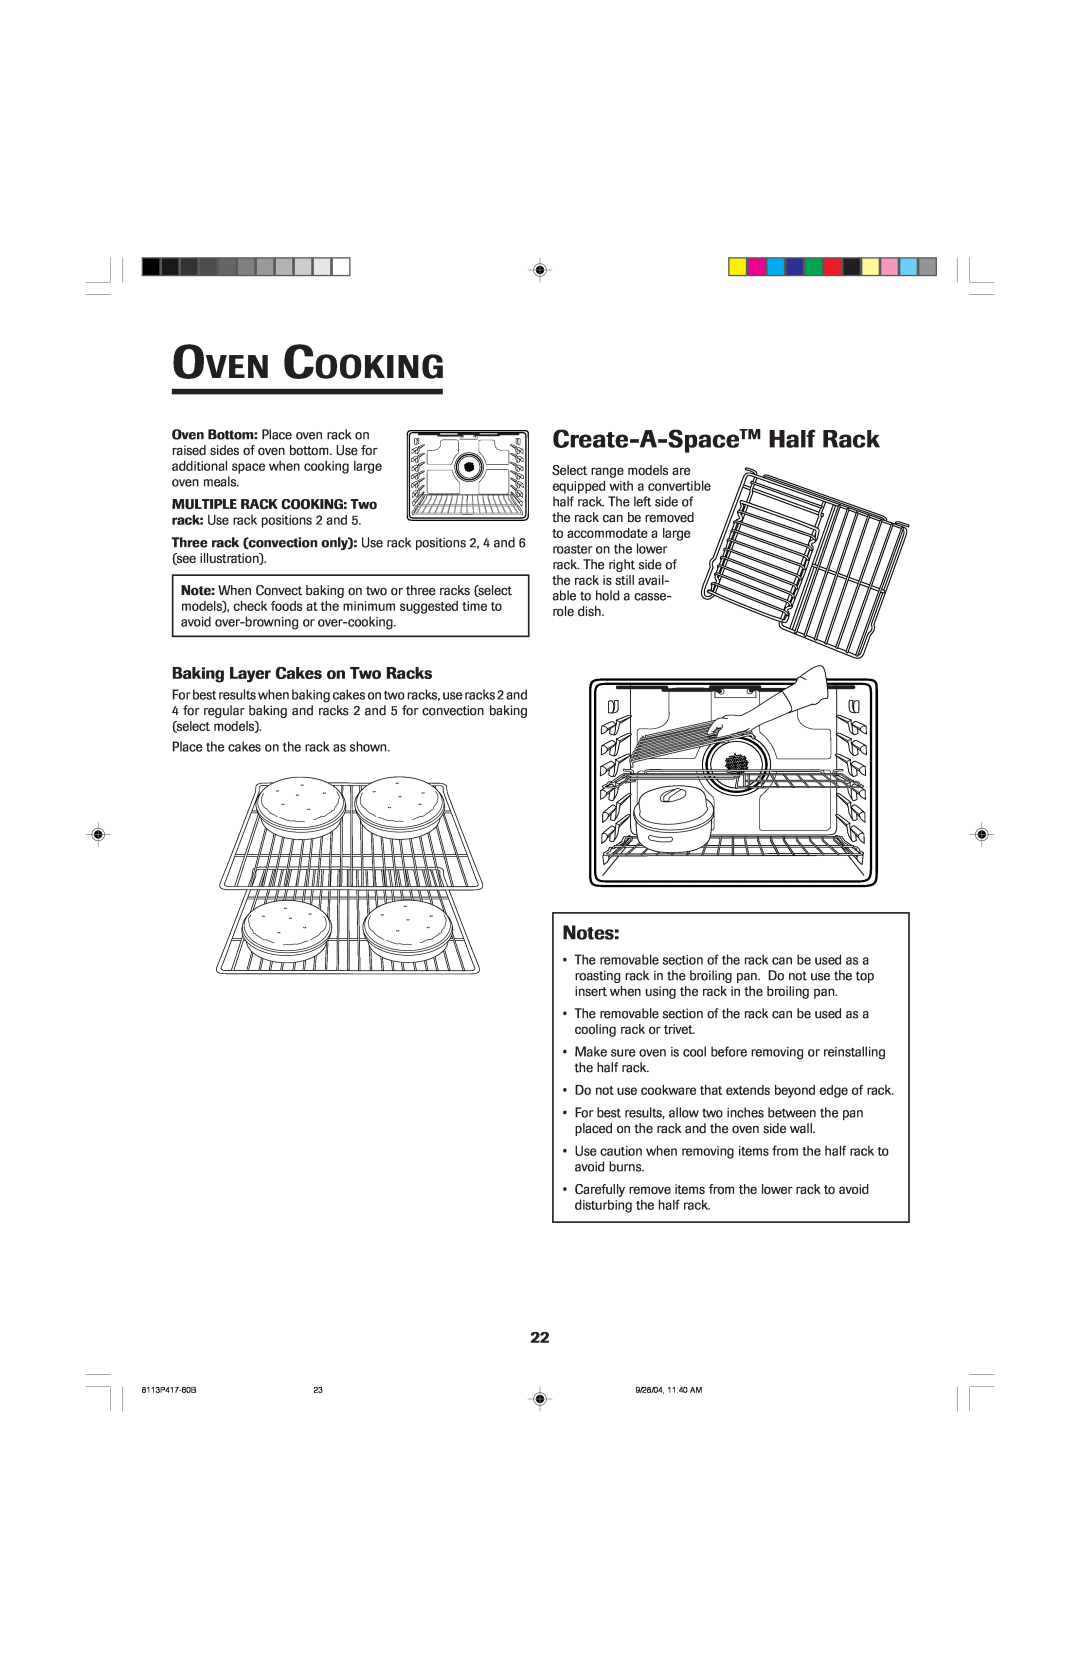 Jenn-Air 800 important safety instructions Create-A-SpaceTM Half Rack, Baking Layer Cakes on Two Racks, Oven Cooking 